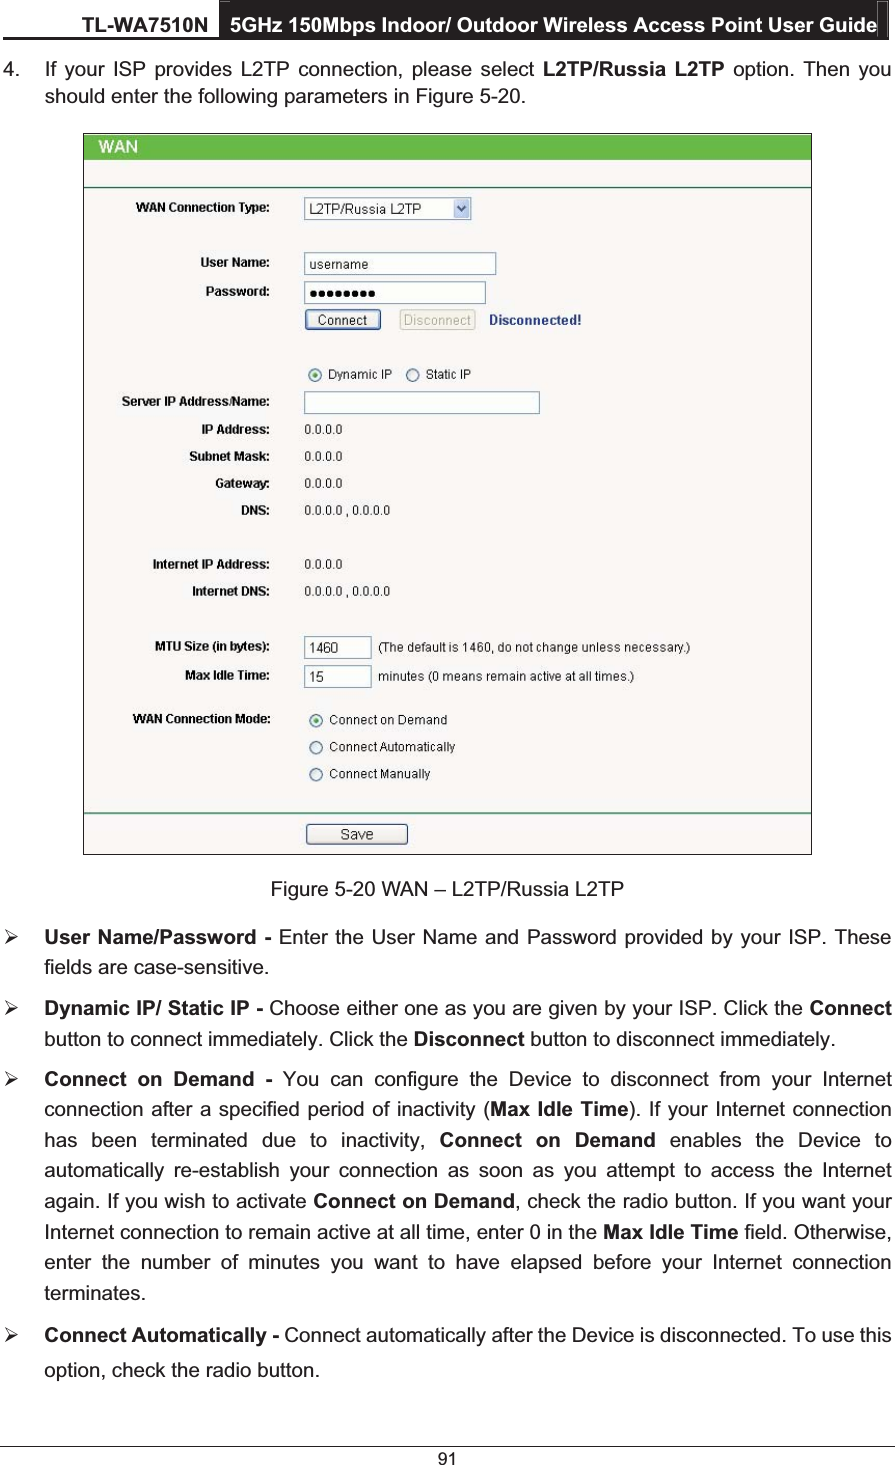 TL-WA7510N 5GHz 150Mbps Indoor/ Outdoor Wireless Access Point User Guide 91 4.  If your ISP provides L2TP connection, please select L2TP/Russia L2TP option. Then you should enter the following parameters in Figure 5-20.  Figure 5-20 WAN – L2TP/Russia L2TP ¾ User Name/Password - Enter the User Name and Password provided by your ISP. These fields are case-sensitive. ¾ Dynamic IP/ Static IP - Choose either one as you are given by your ISP. Click the Connect button to connect immediately. Click the Disconnect button to disconnect immediately. ¾ Connect on Demand - You can configure the Device to disconnect from your Internet connection after a specified period of inactivity (Max Idle Time). If your Internet connection has been terminated due to inactivity, Connect on Demand enables the Device to automatically re-establish your connection as soon as you attempt to access the Internet again. If you wish to activate Connect on Demand, check the radio button. If you want your Internet connection to remain active at all time, enter 0 in the Max Idle Time field. Otherwise, enter the number of minutes you want to have elapsed before your Internet connection terminates. ¾ Connect Automatically - Connect automatically after the Device is disconnected. To use this option, check the radio button. 